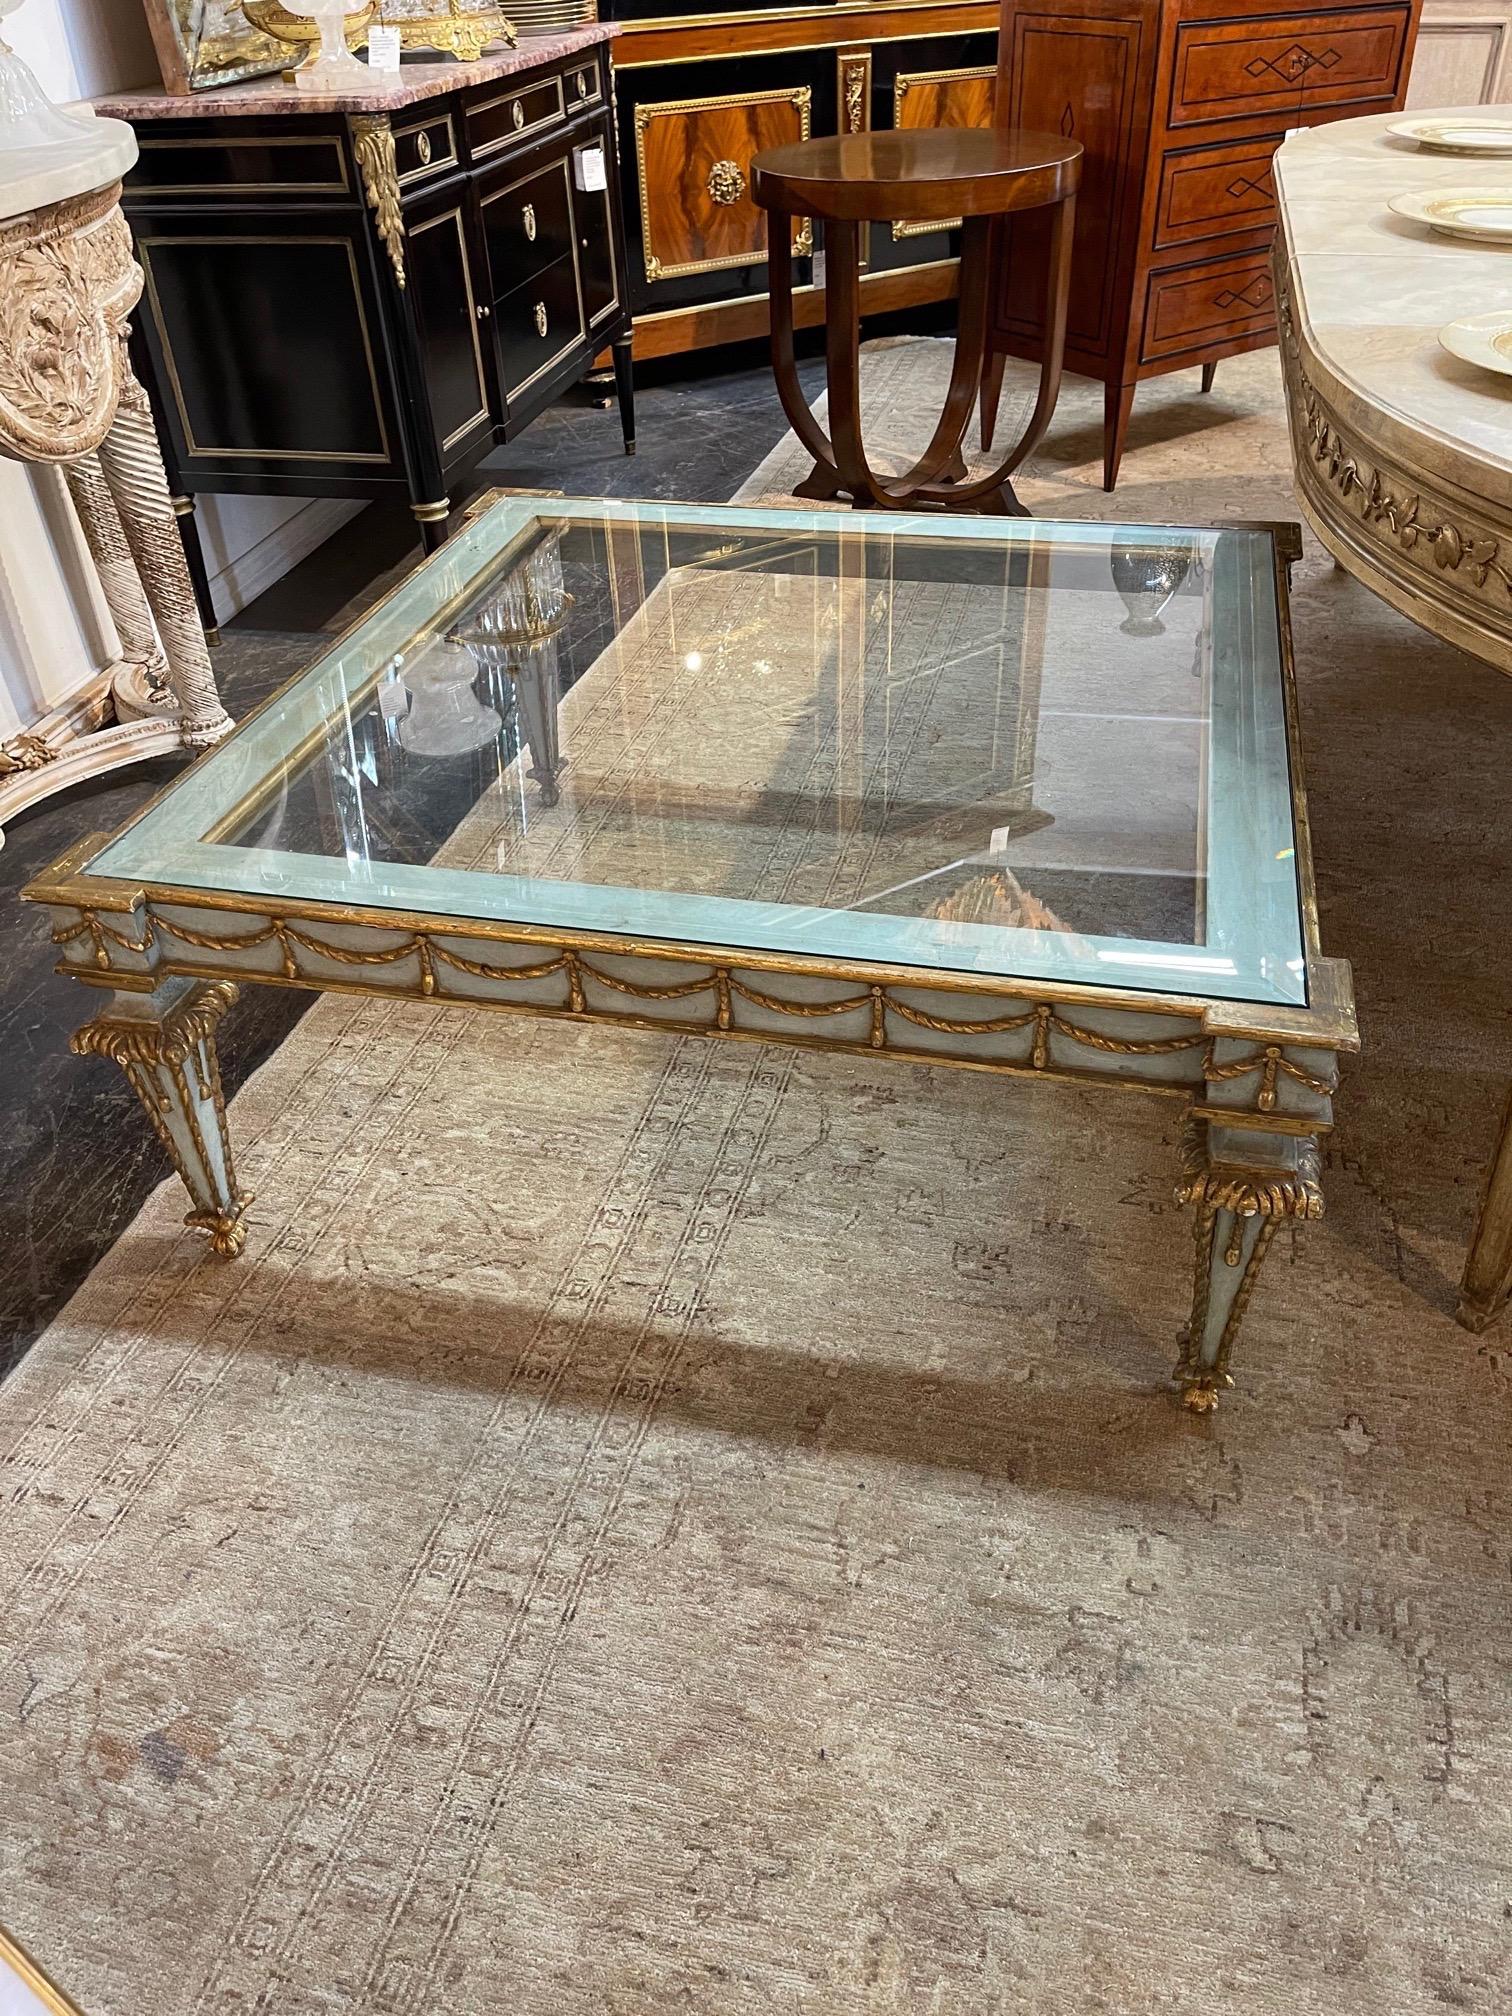 Decorative vintage Italian carved and parcel gilt coffee table. Lovely carvings and beautiful colors of creme, gold and pale blue. So pretty!